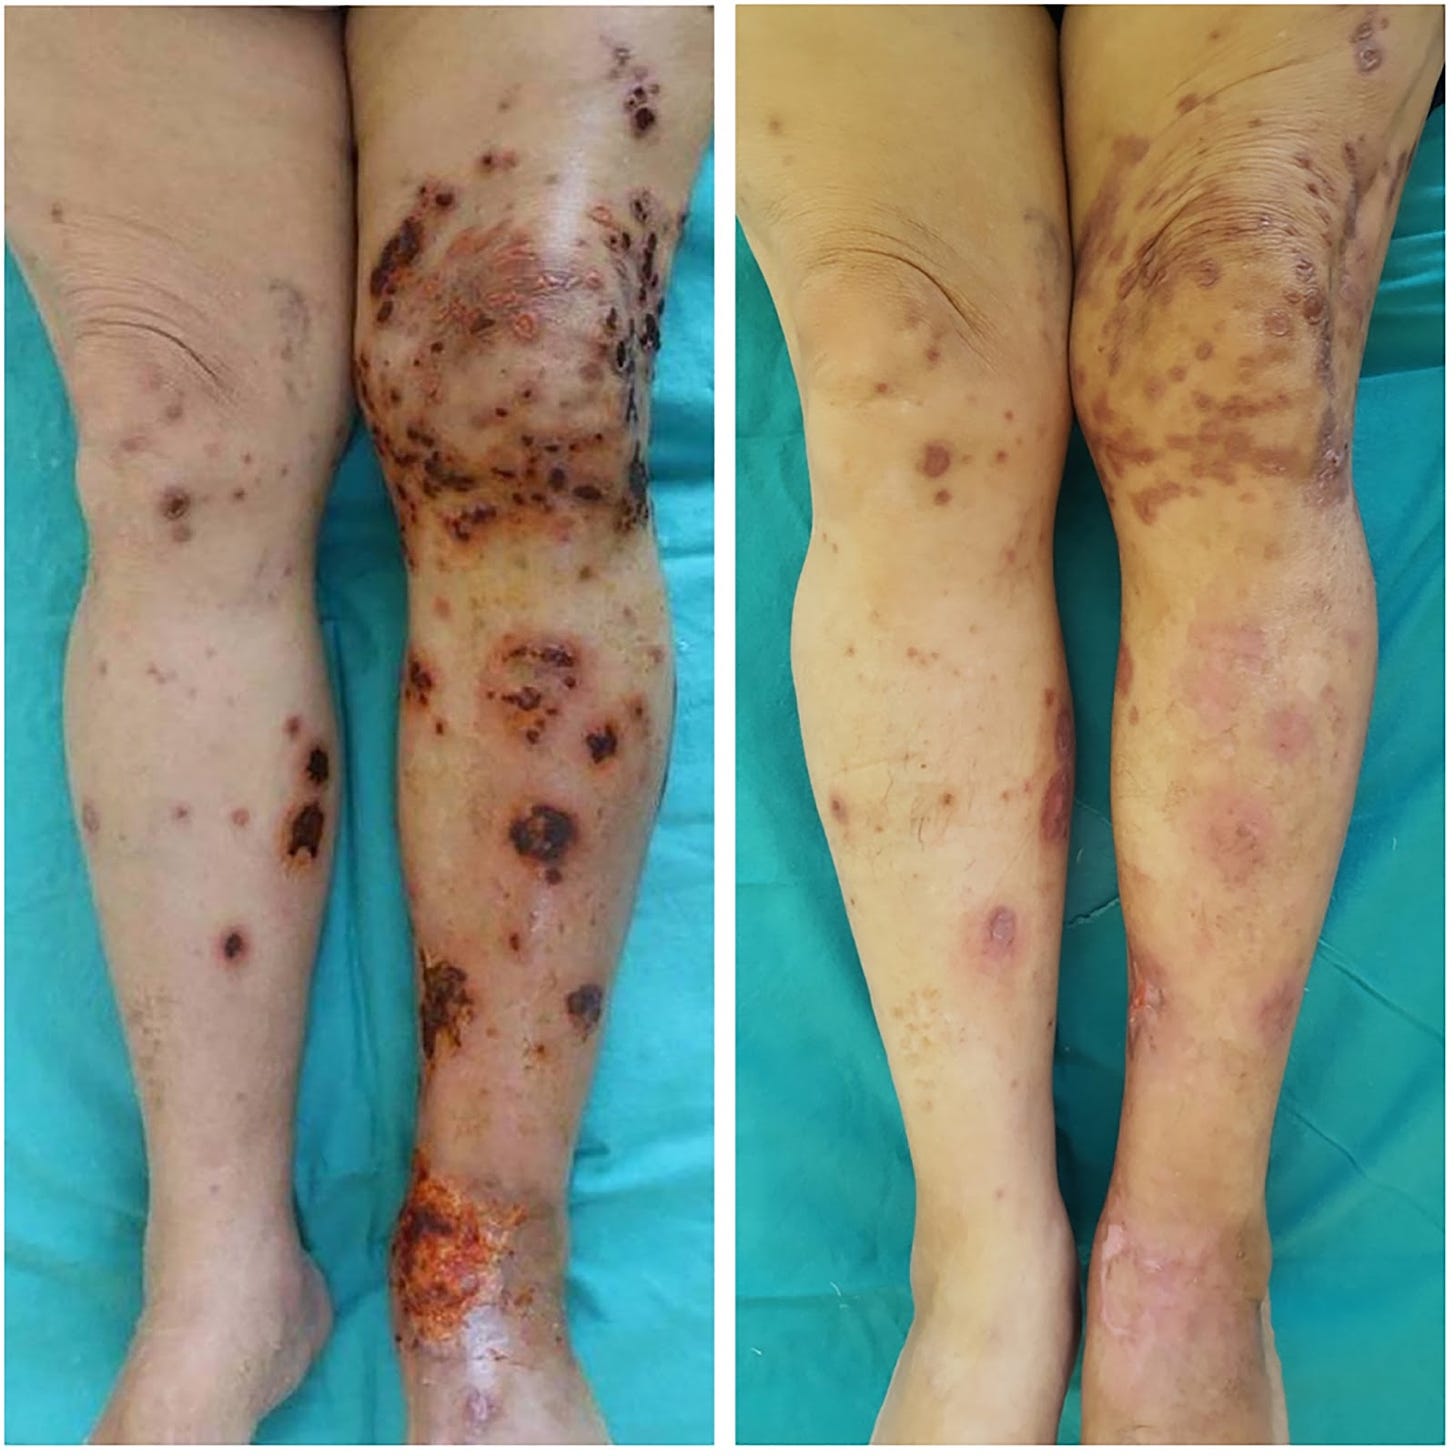 Fusarium solani infection in a diabetic patient treated with itraconazole  and debridement - Karadağ - 2020 - Dermatologic Therapy - Wiley Online  Library